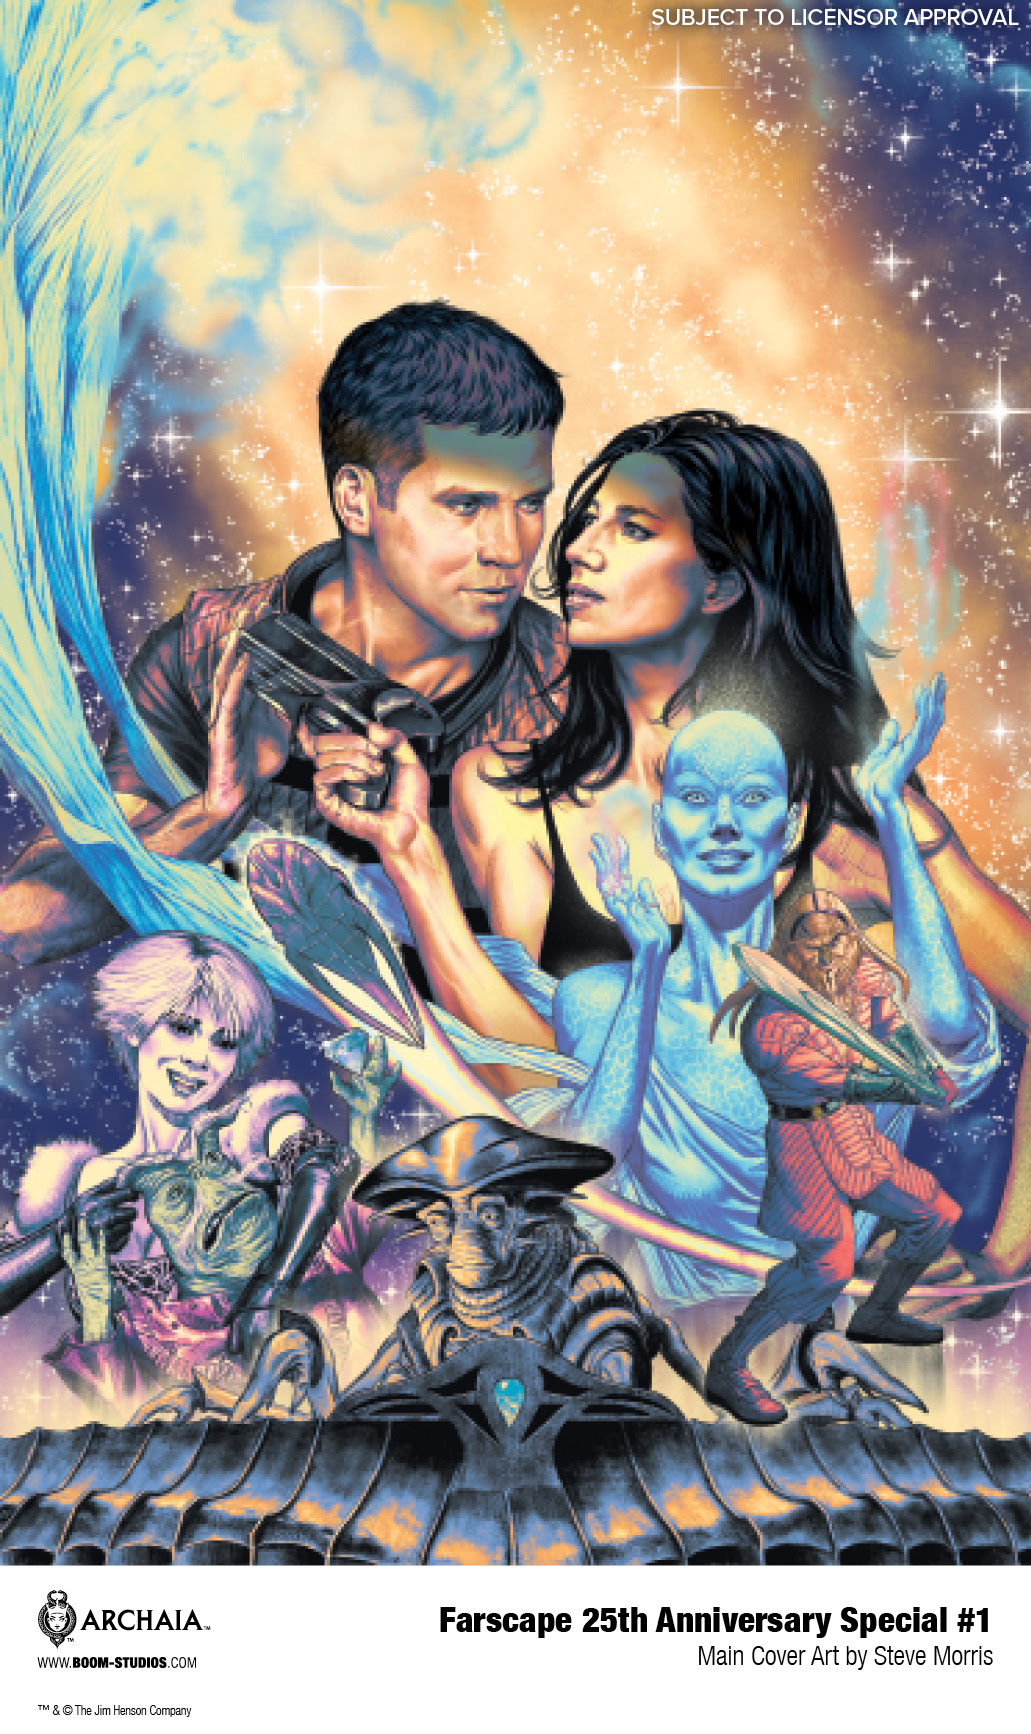 Art from Farscape 25th Anniversary Special #1